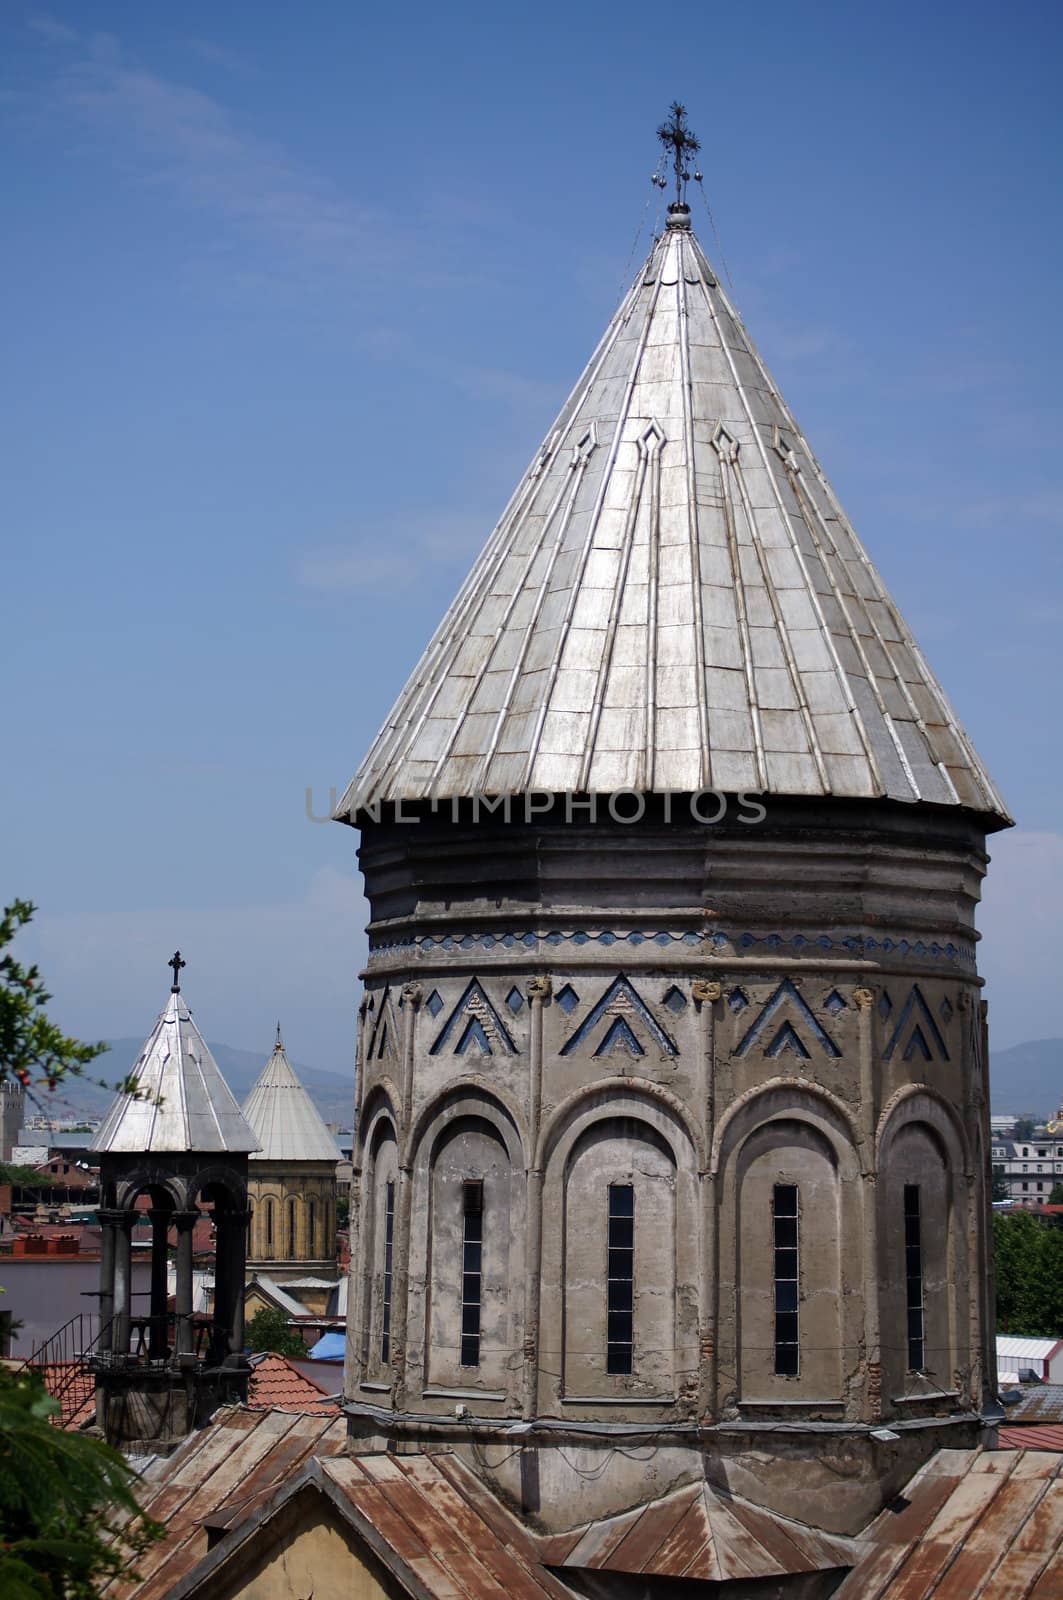 Dome of main armenian cathedral of Surb Gevork in Tbilisi by Elet